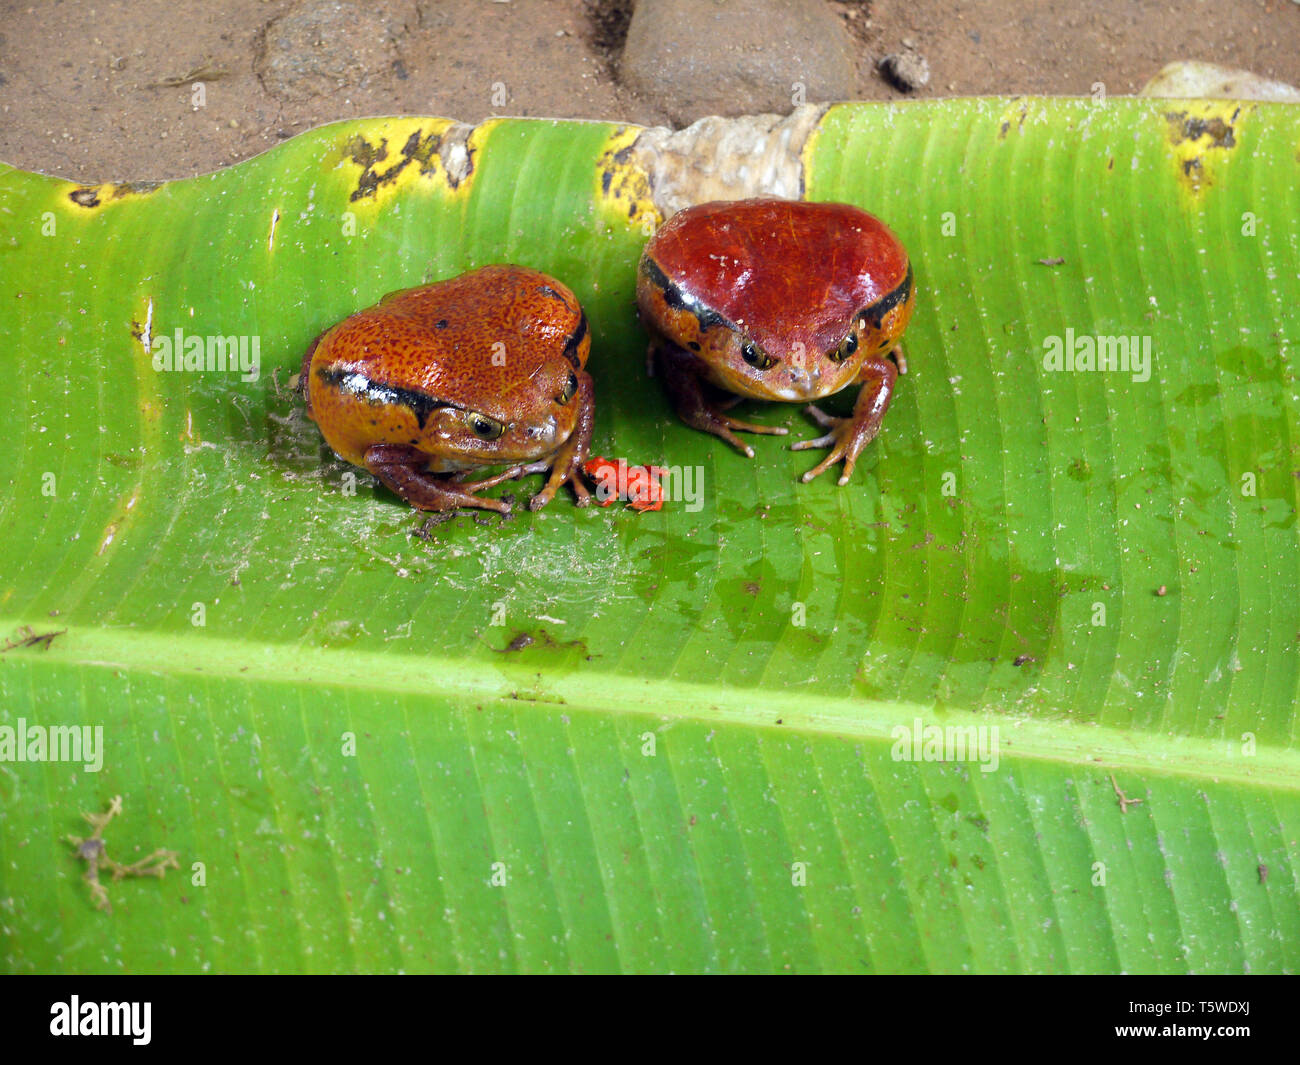 Two large red frogs with a tiny frog on a banana leaf, in Madagascar. Stock Photo